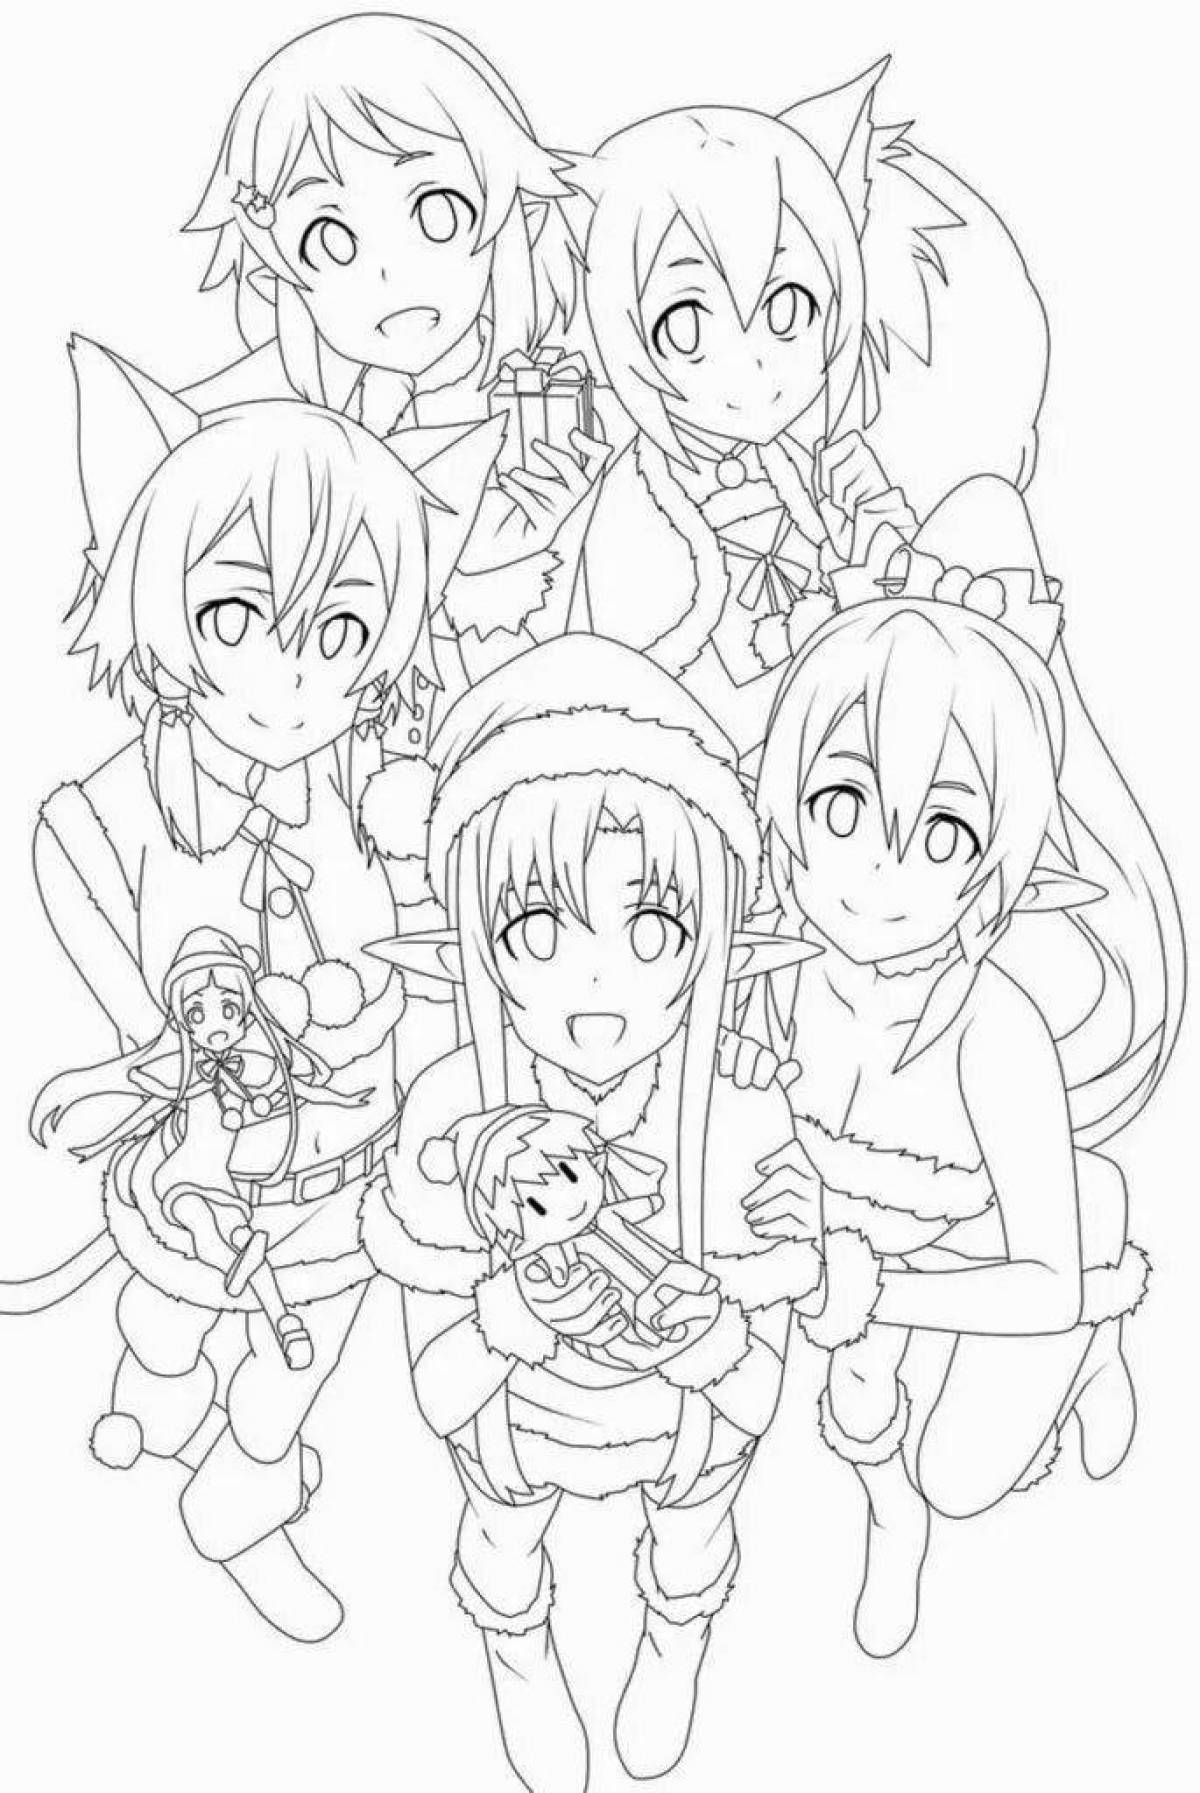 Awesome new year anime coloring book